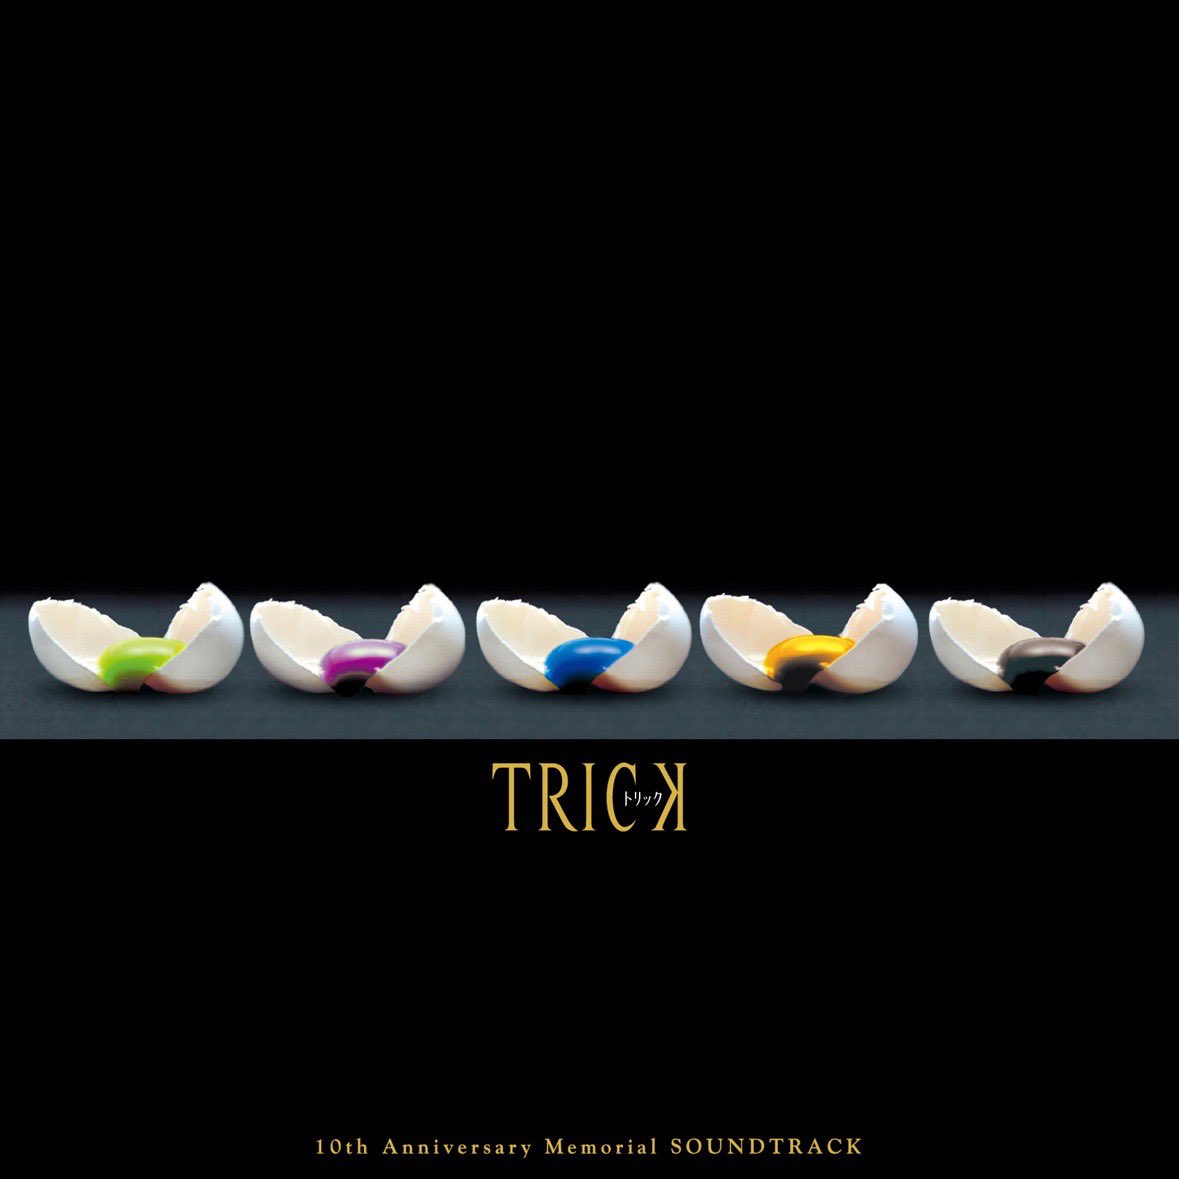 #Nowplaying Mystic Antique(ピアノ版) - 辻 陽 (TRICK 10th Anniversary Memorial Soundtrack) ♪ https://t.co/wz94a79L0o